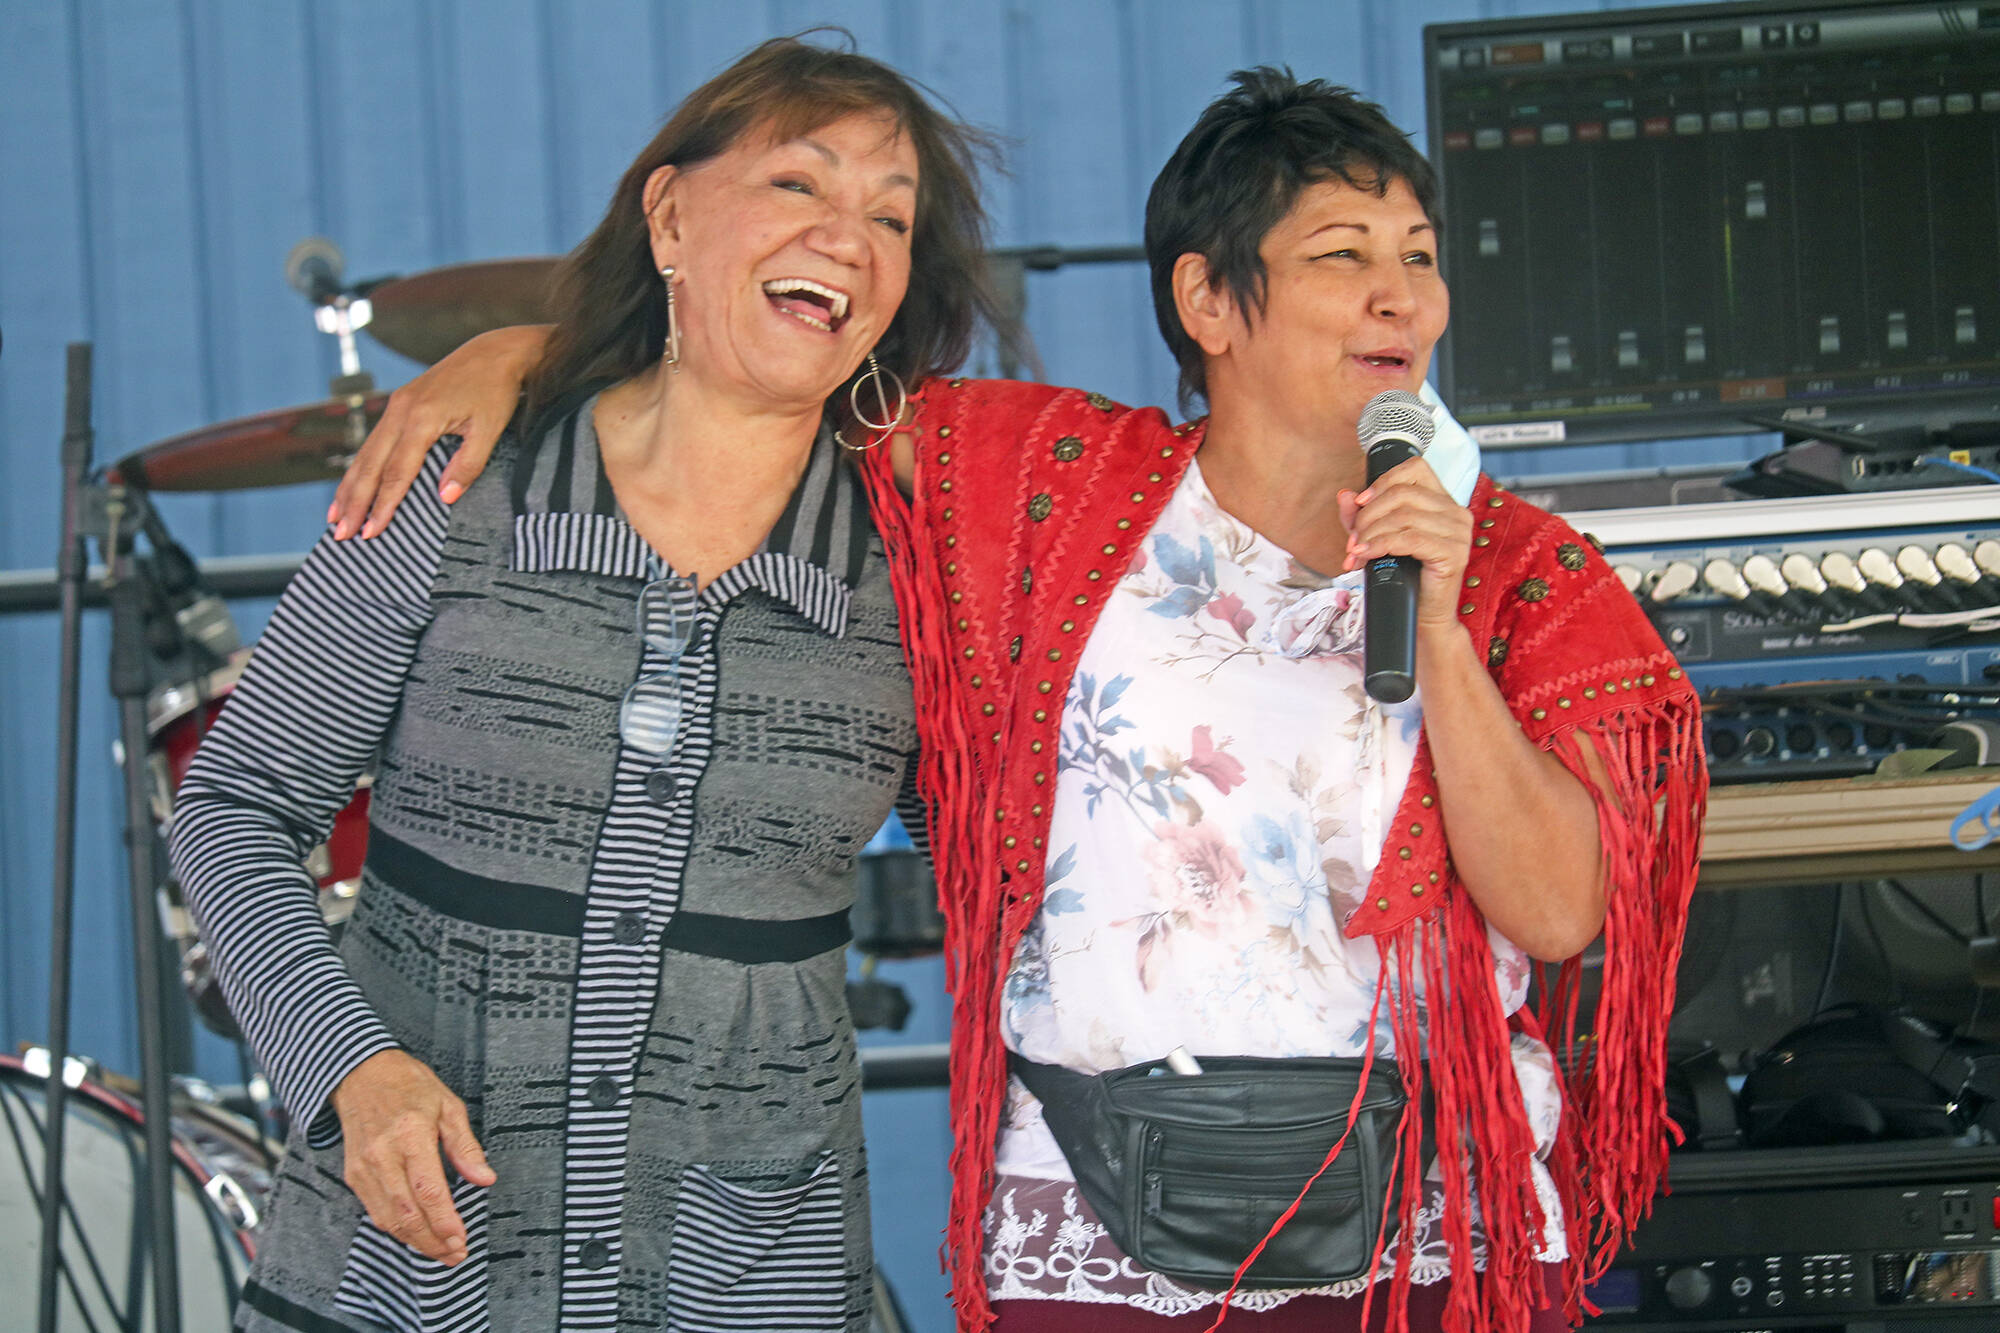 Abbie Crook, employment officer with the Soaring Eagle Friendship Centre, and Métis Bev Lambert greet guests to a Community Wellness event July 24. NNSL file photo